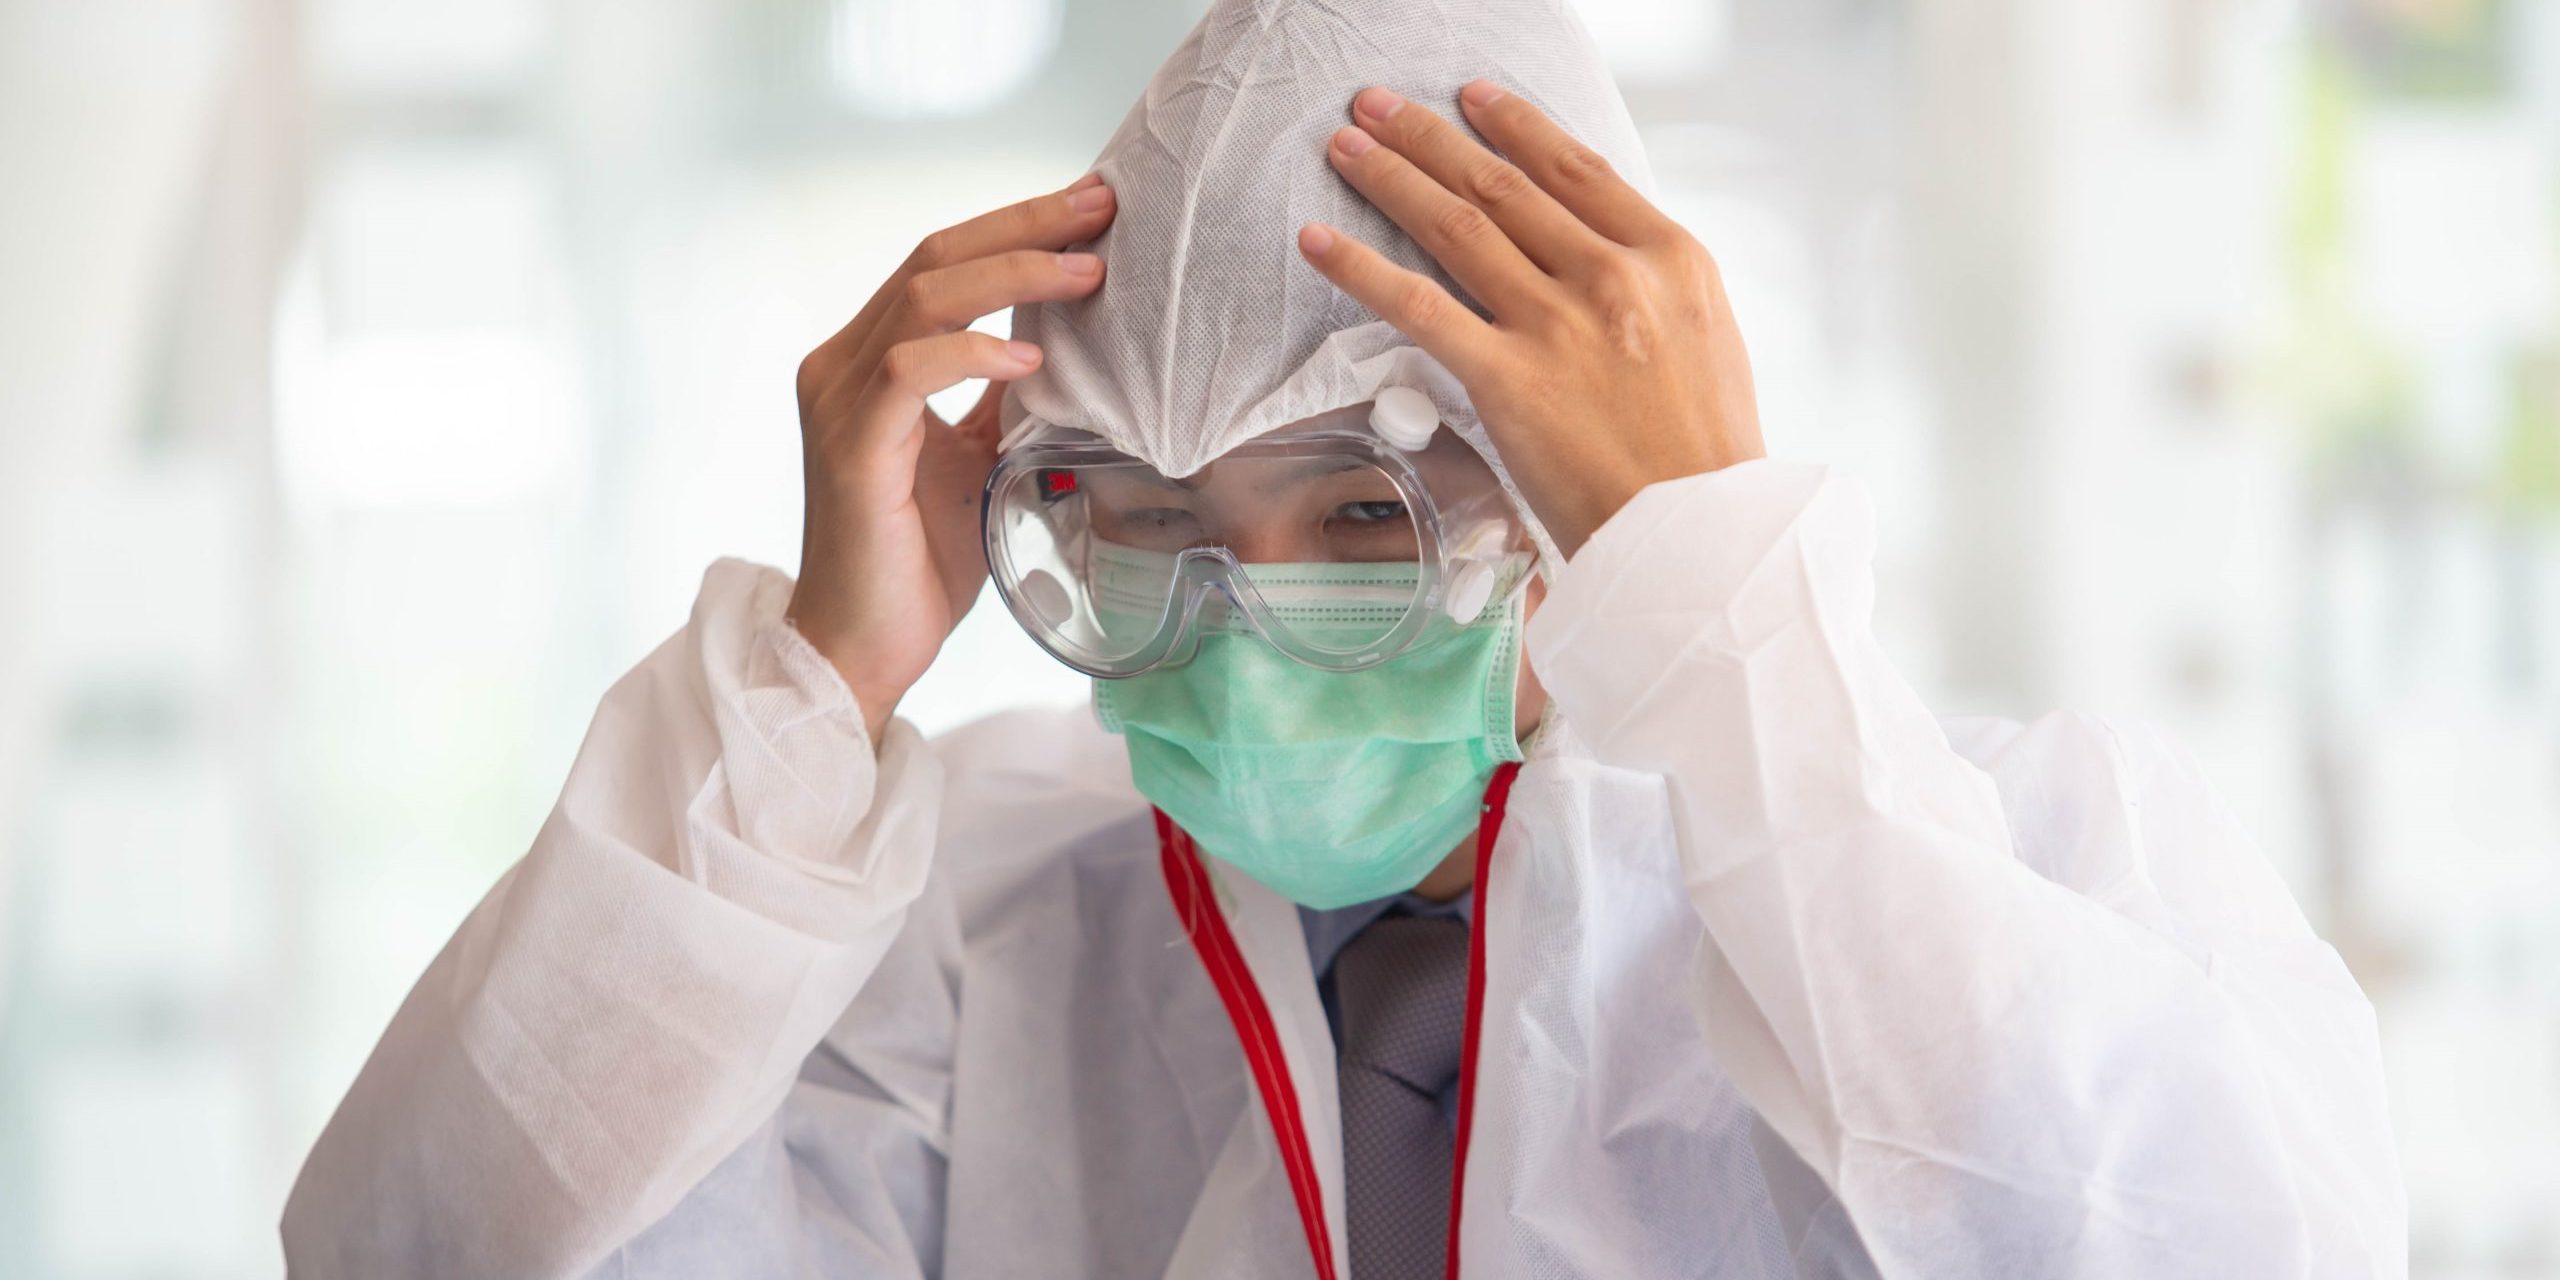 Doctors are searching for Covid's anti-virus serum by studying lung infection photos, protected by a mask and sanitary gloves.